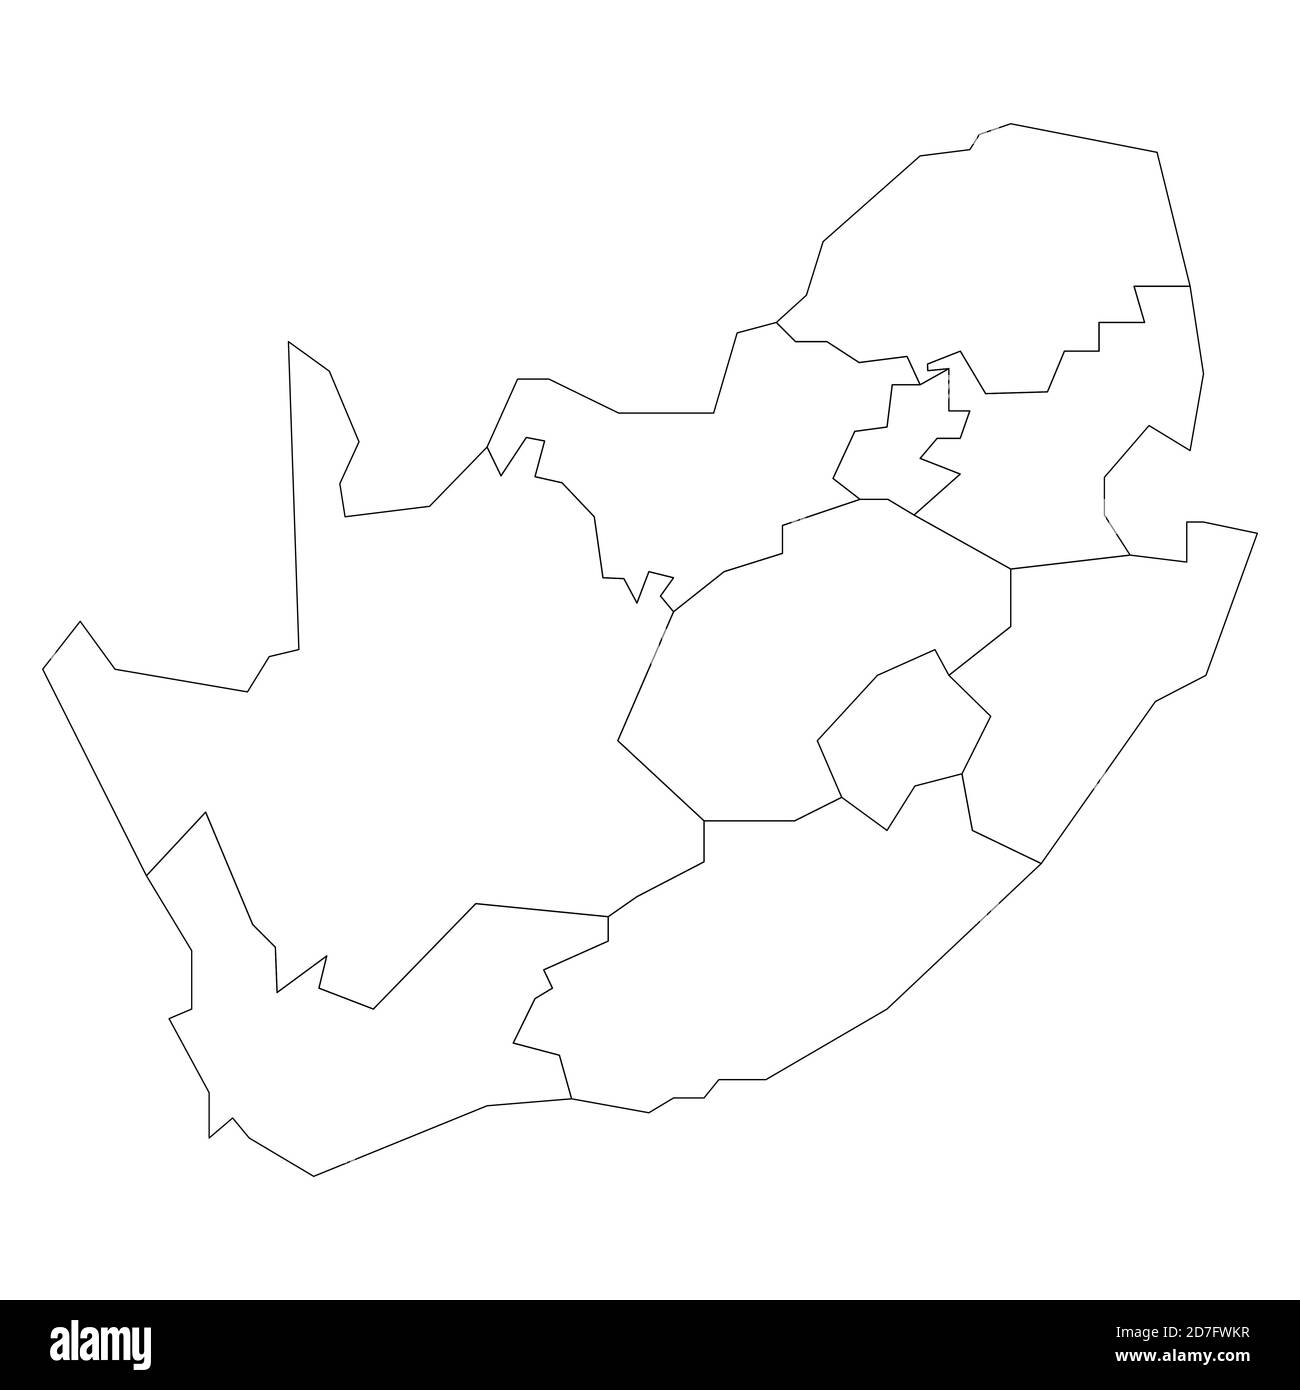 Blank political map of South Africe, RSA. Administrative divisions - provinces. Simple black outline vector map. Stock Vector